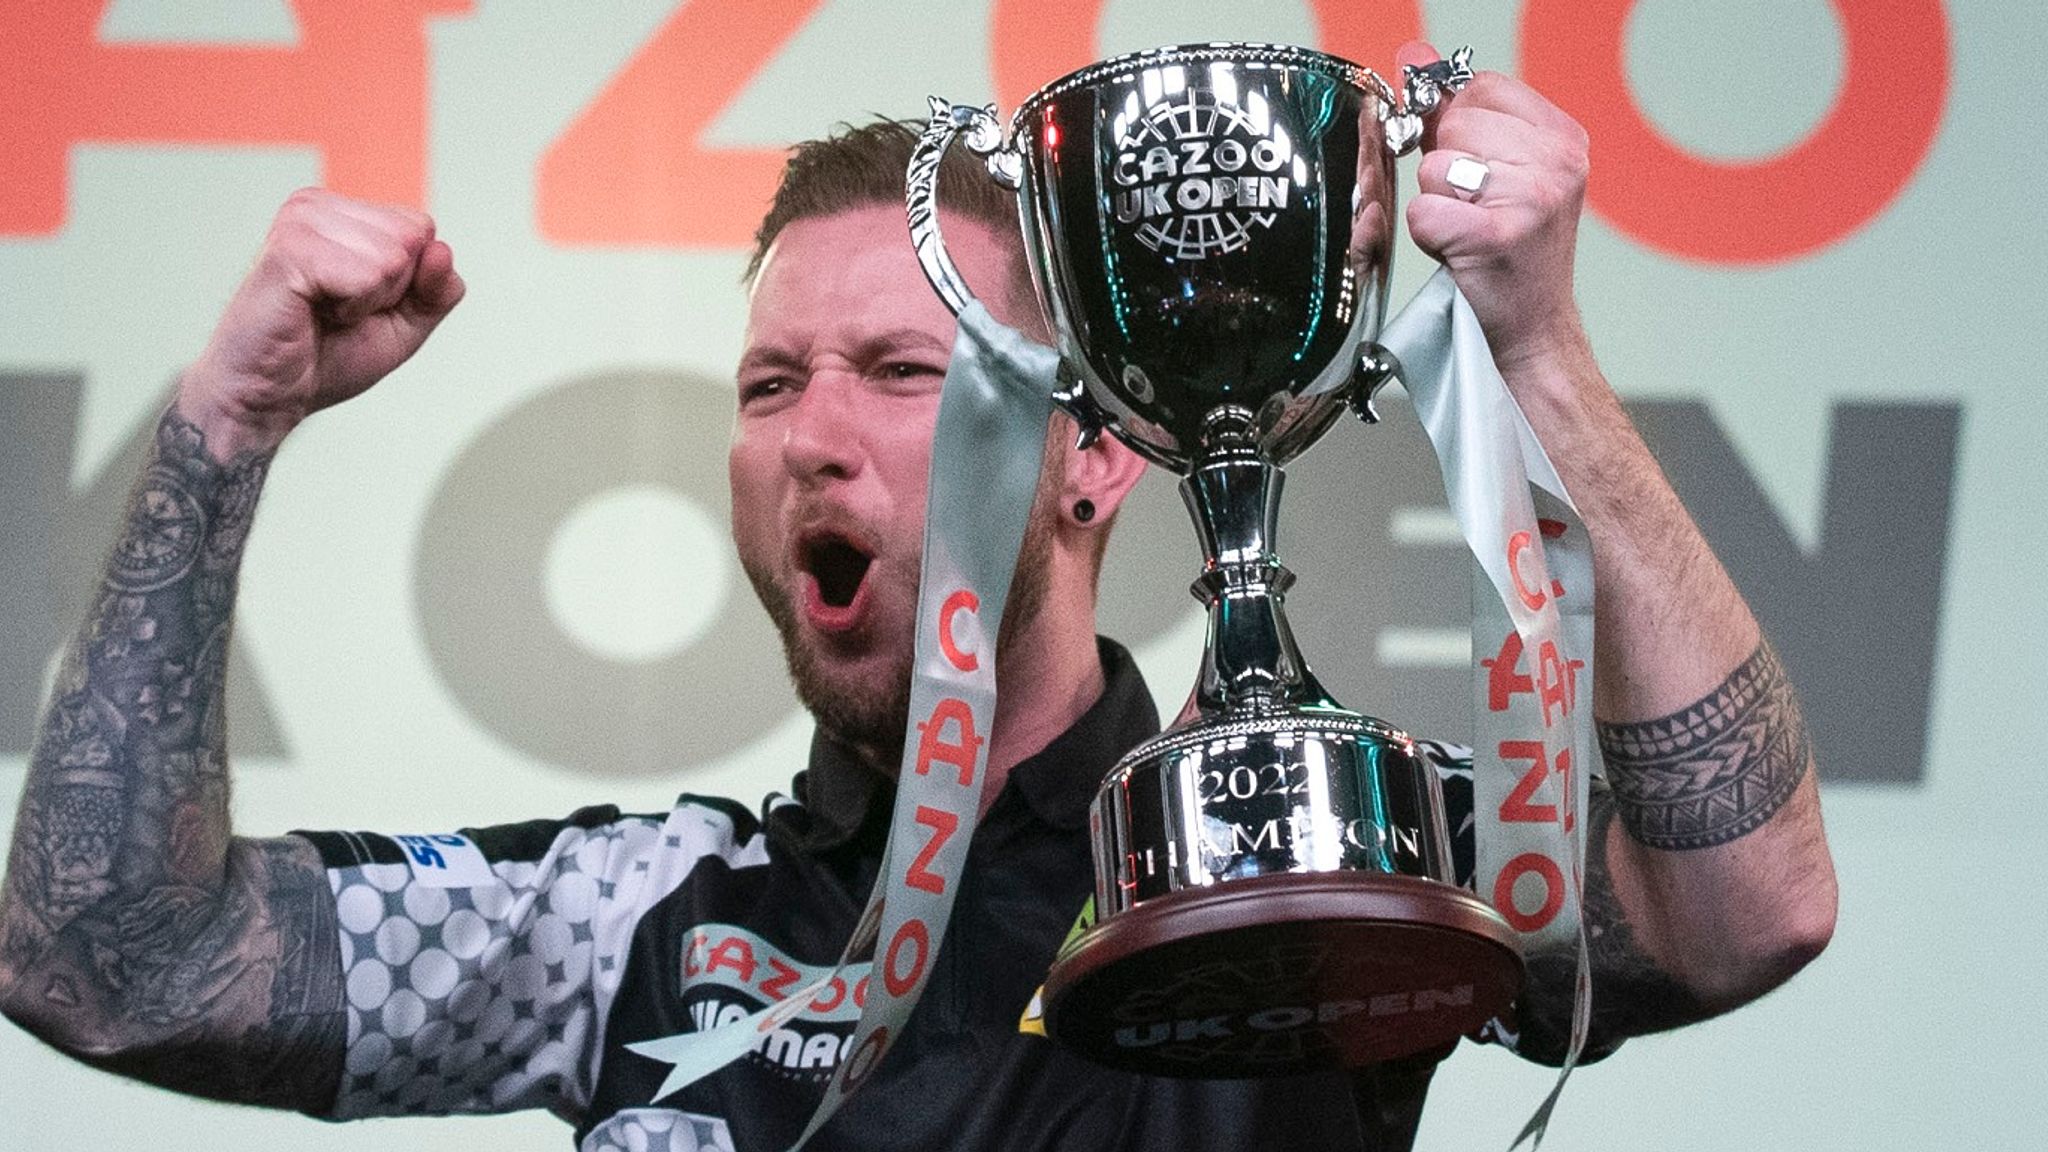 Danny Noppert beats Michael Smith to claim UK Open title in thrilling final-leg finish Darts News Sky Sports